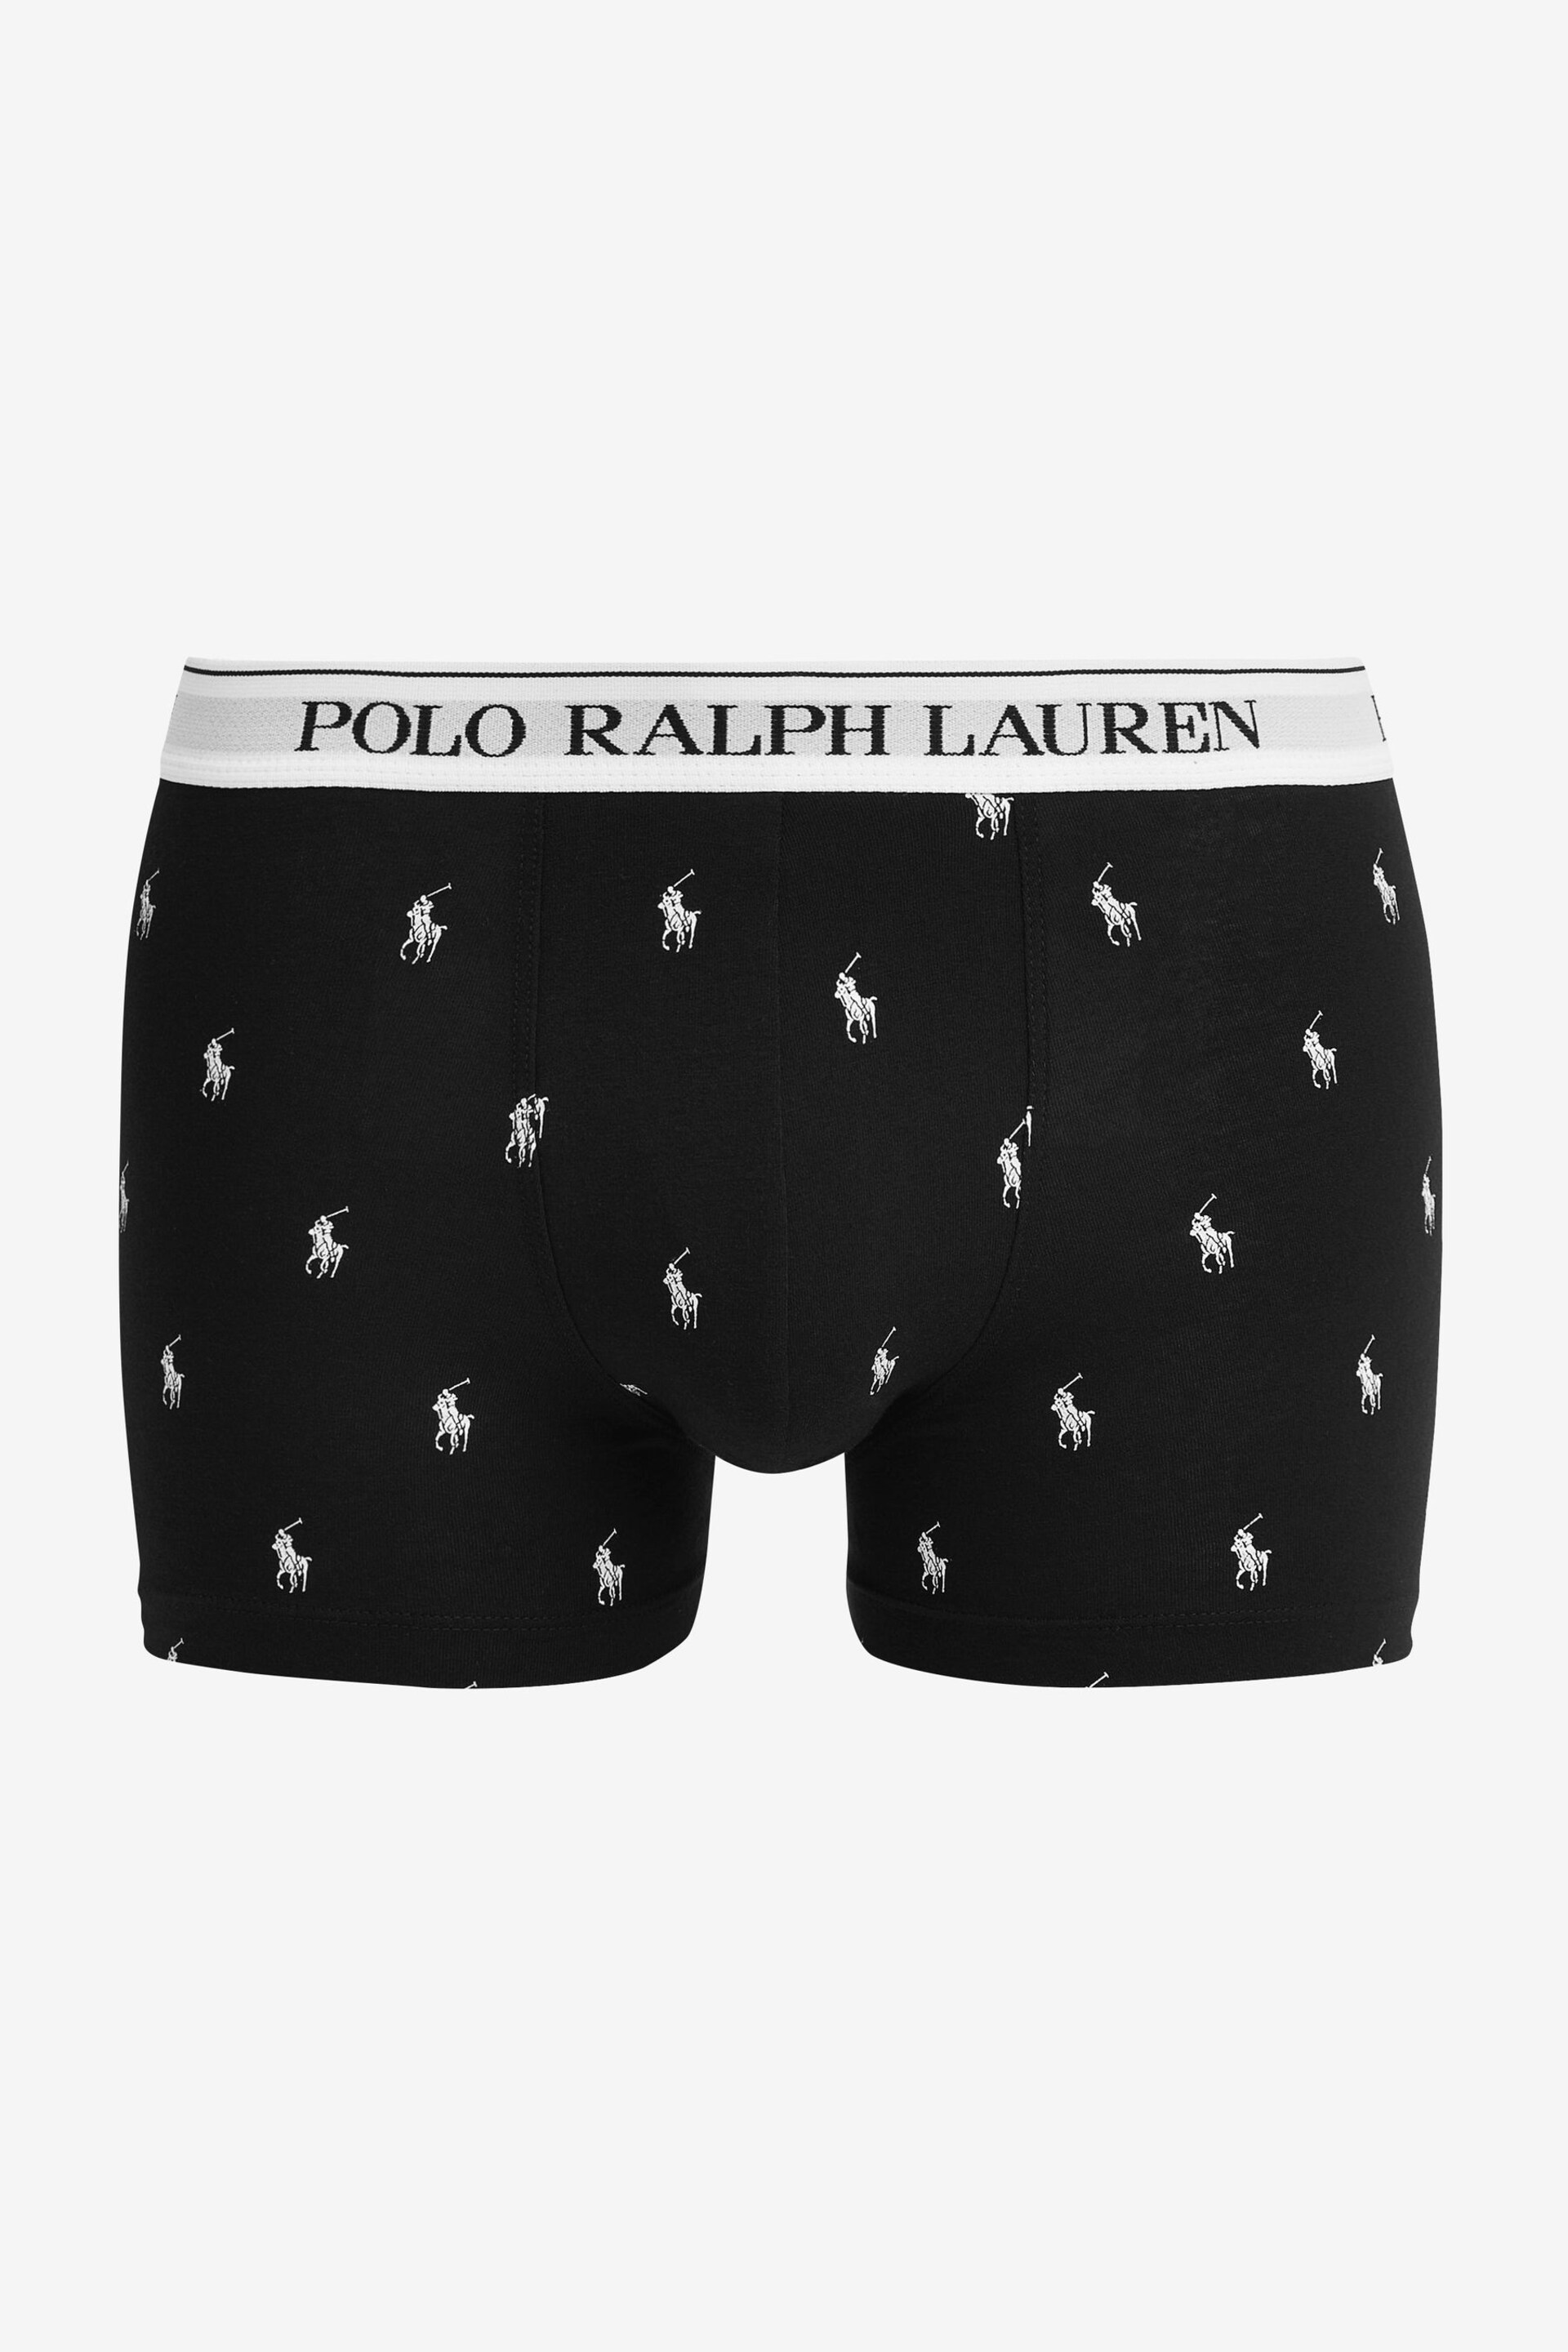 Polo Ralph Lauren Classic Stretch Cotton Boxers 5-Pack - Image 6 of 12